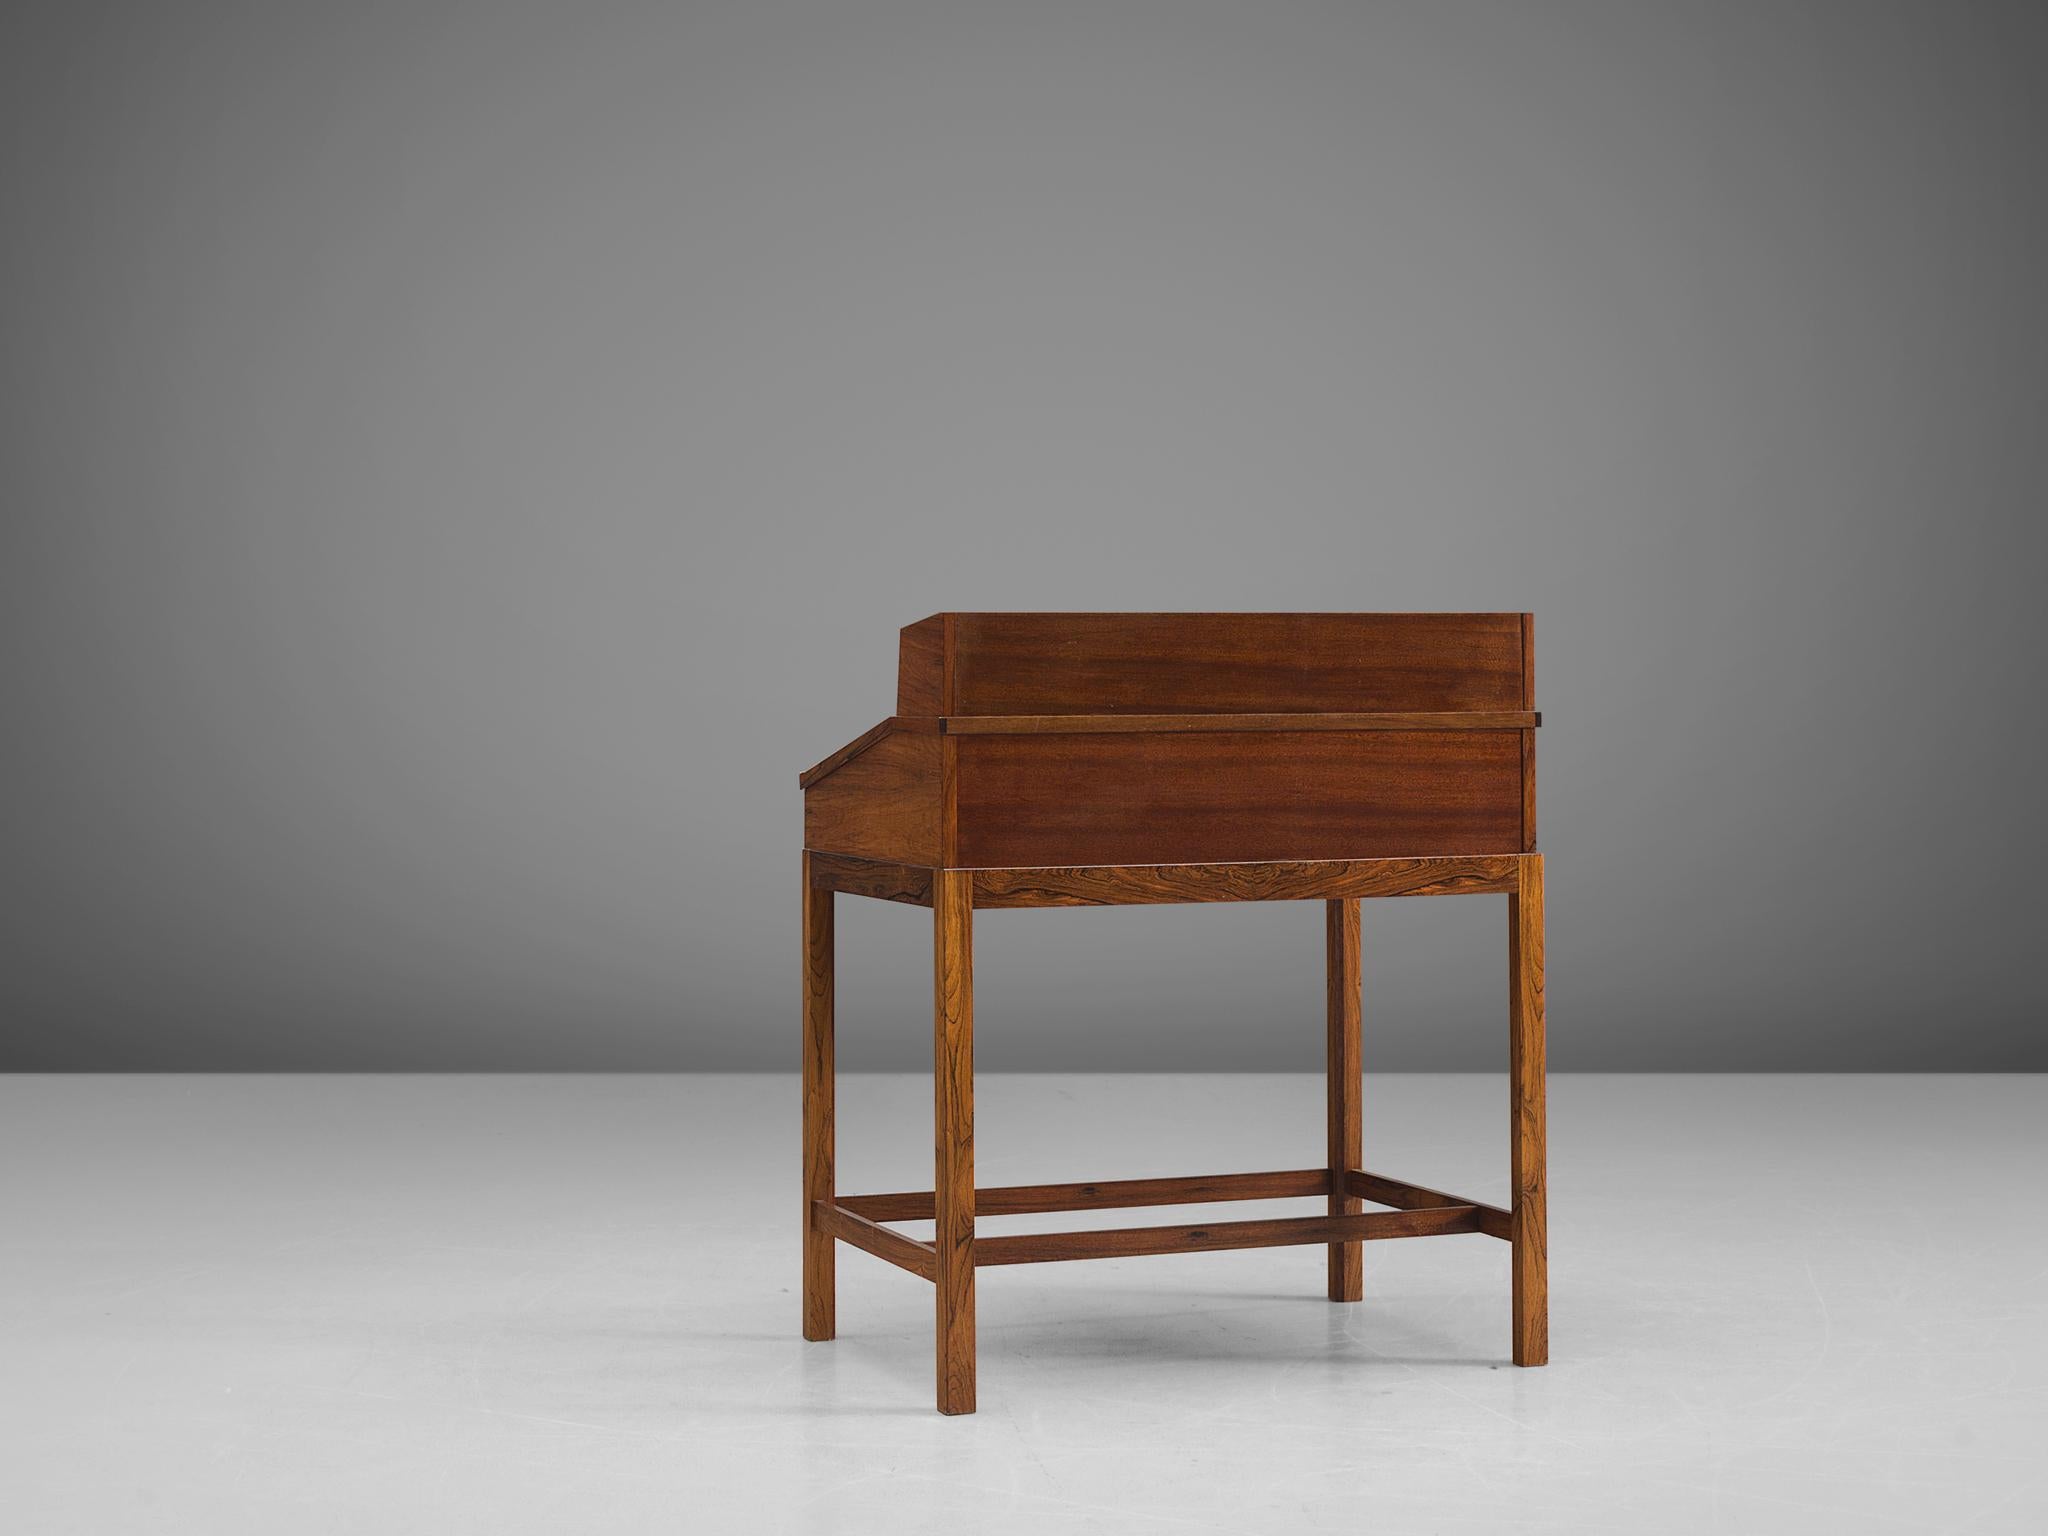 Danish Writing Desk with Olive Green Leather and Rosewood 3